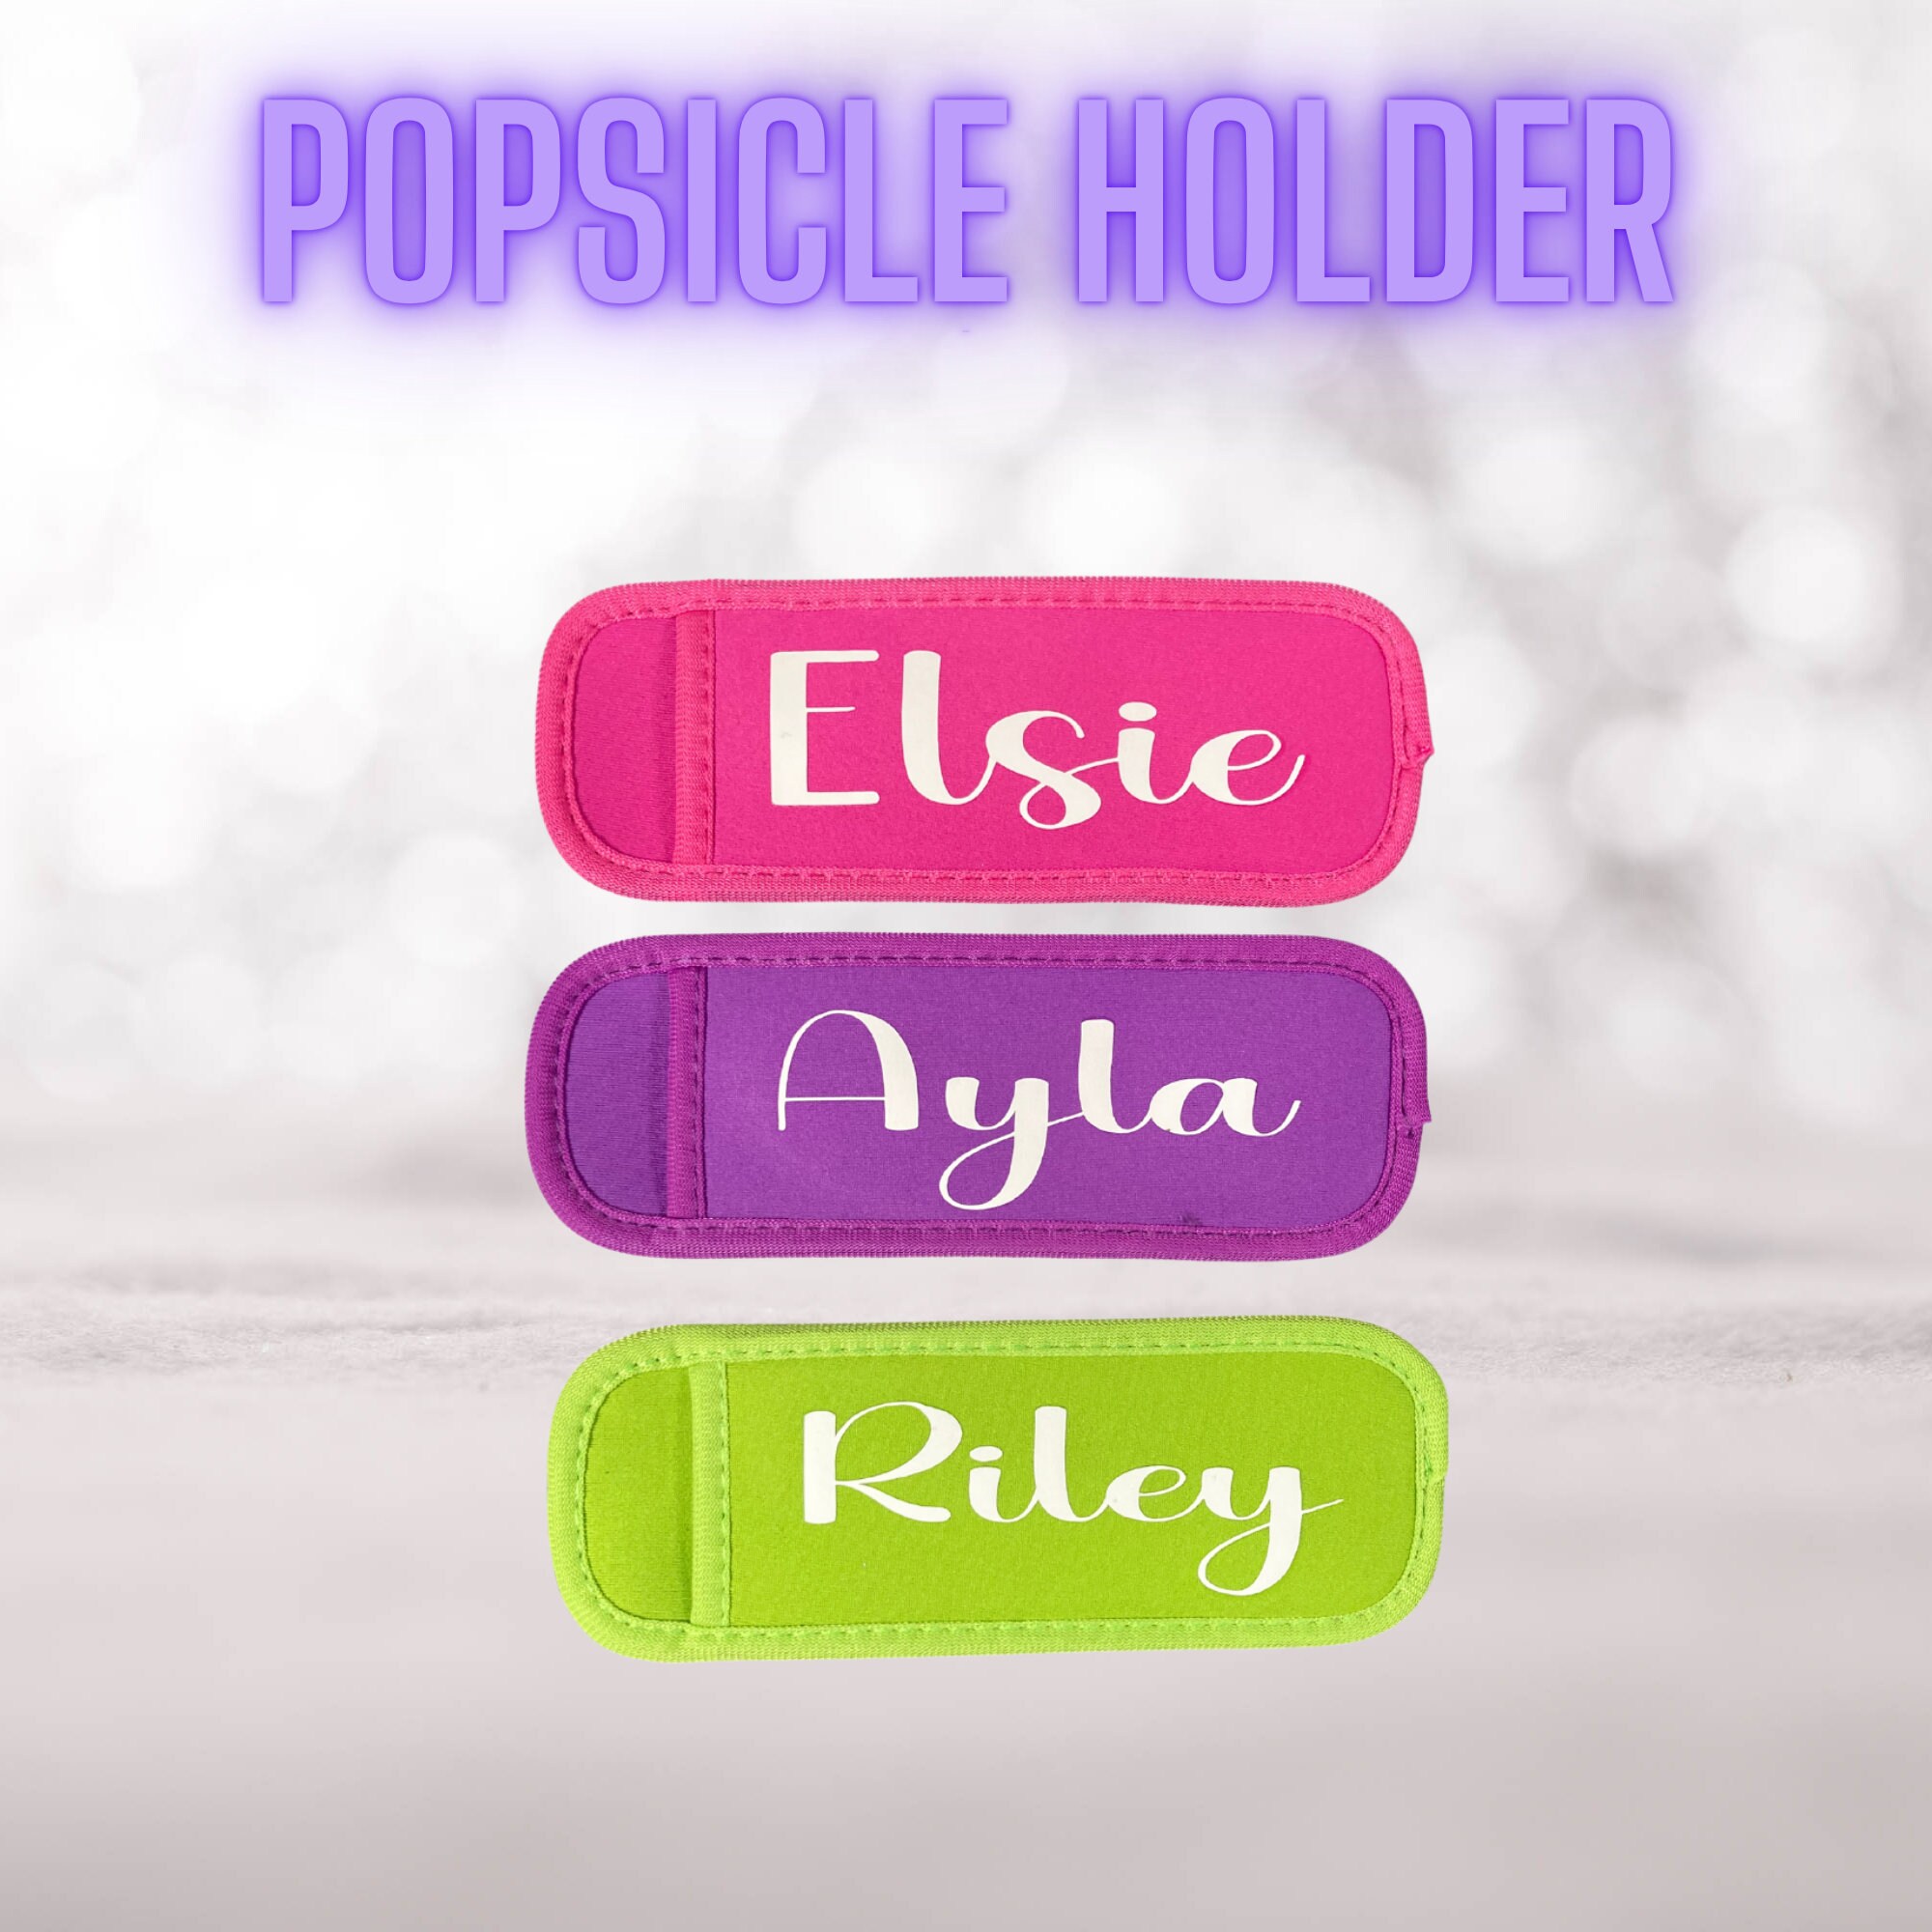 Floridivy Neoprene Popsicle Holder Icy Pole Ice Lolly Freezer Pop Sleeve Kids Protector 